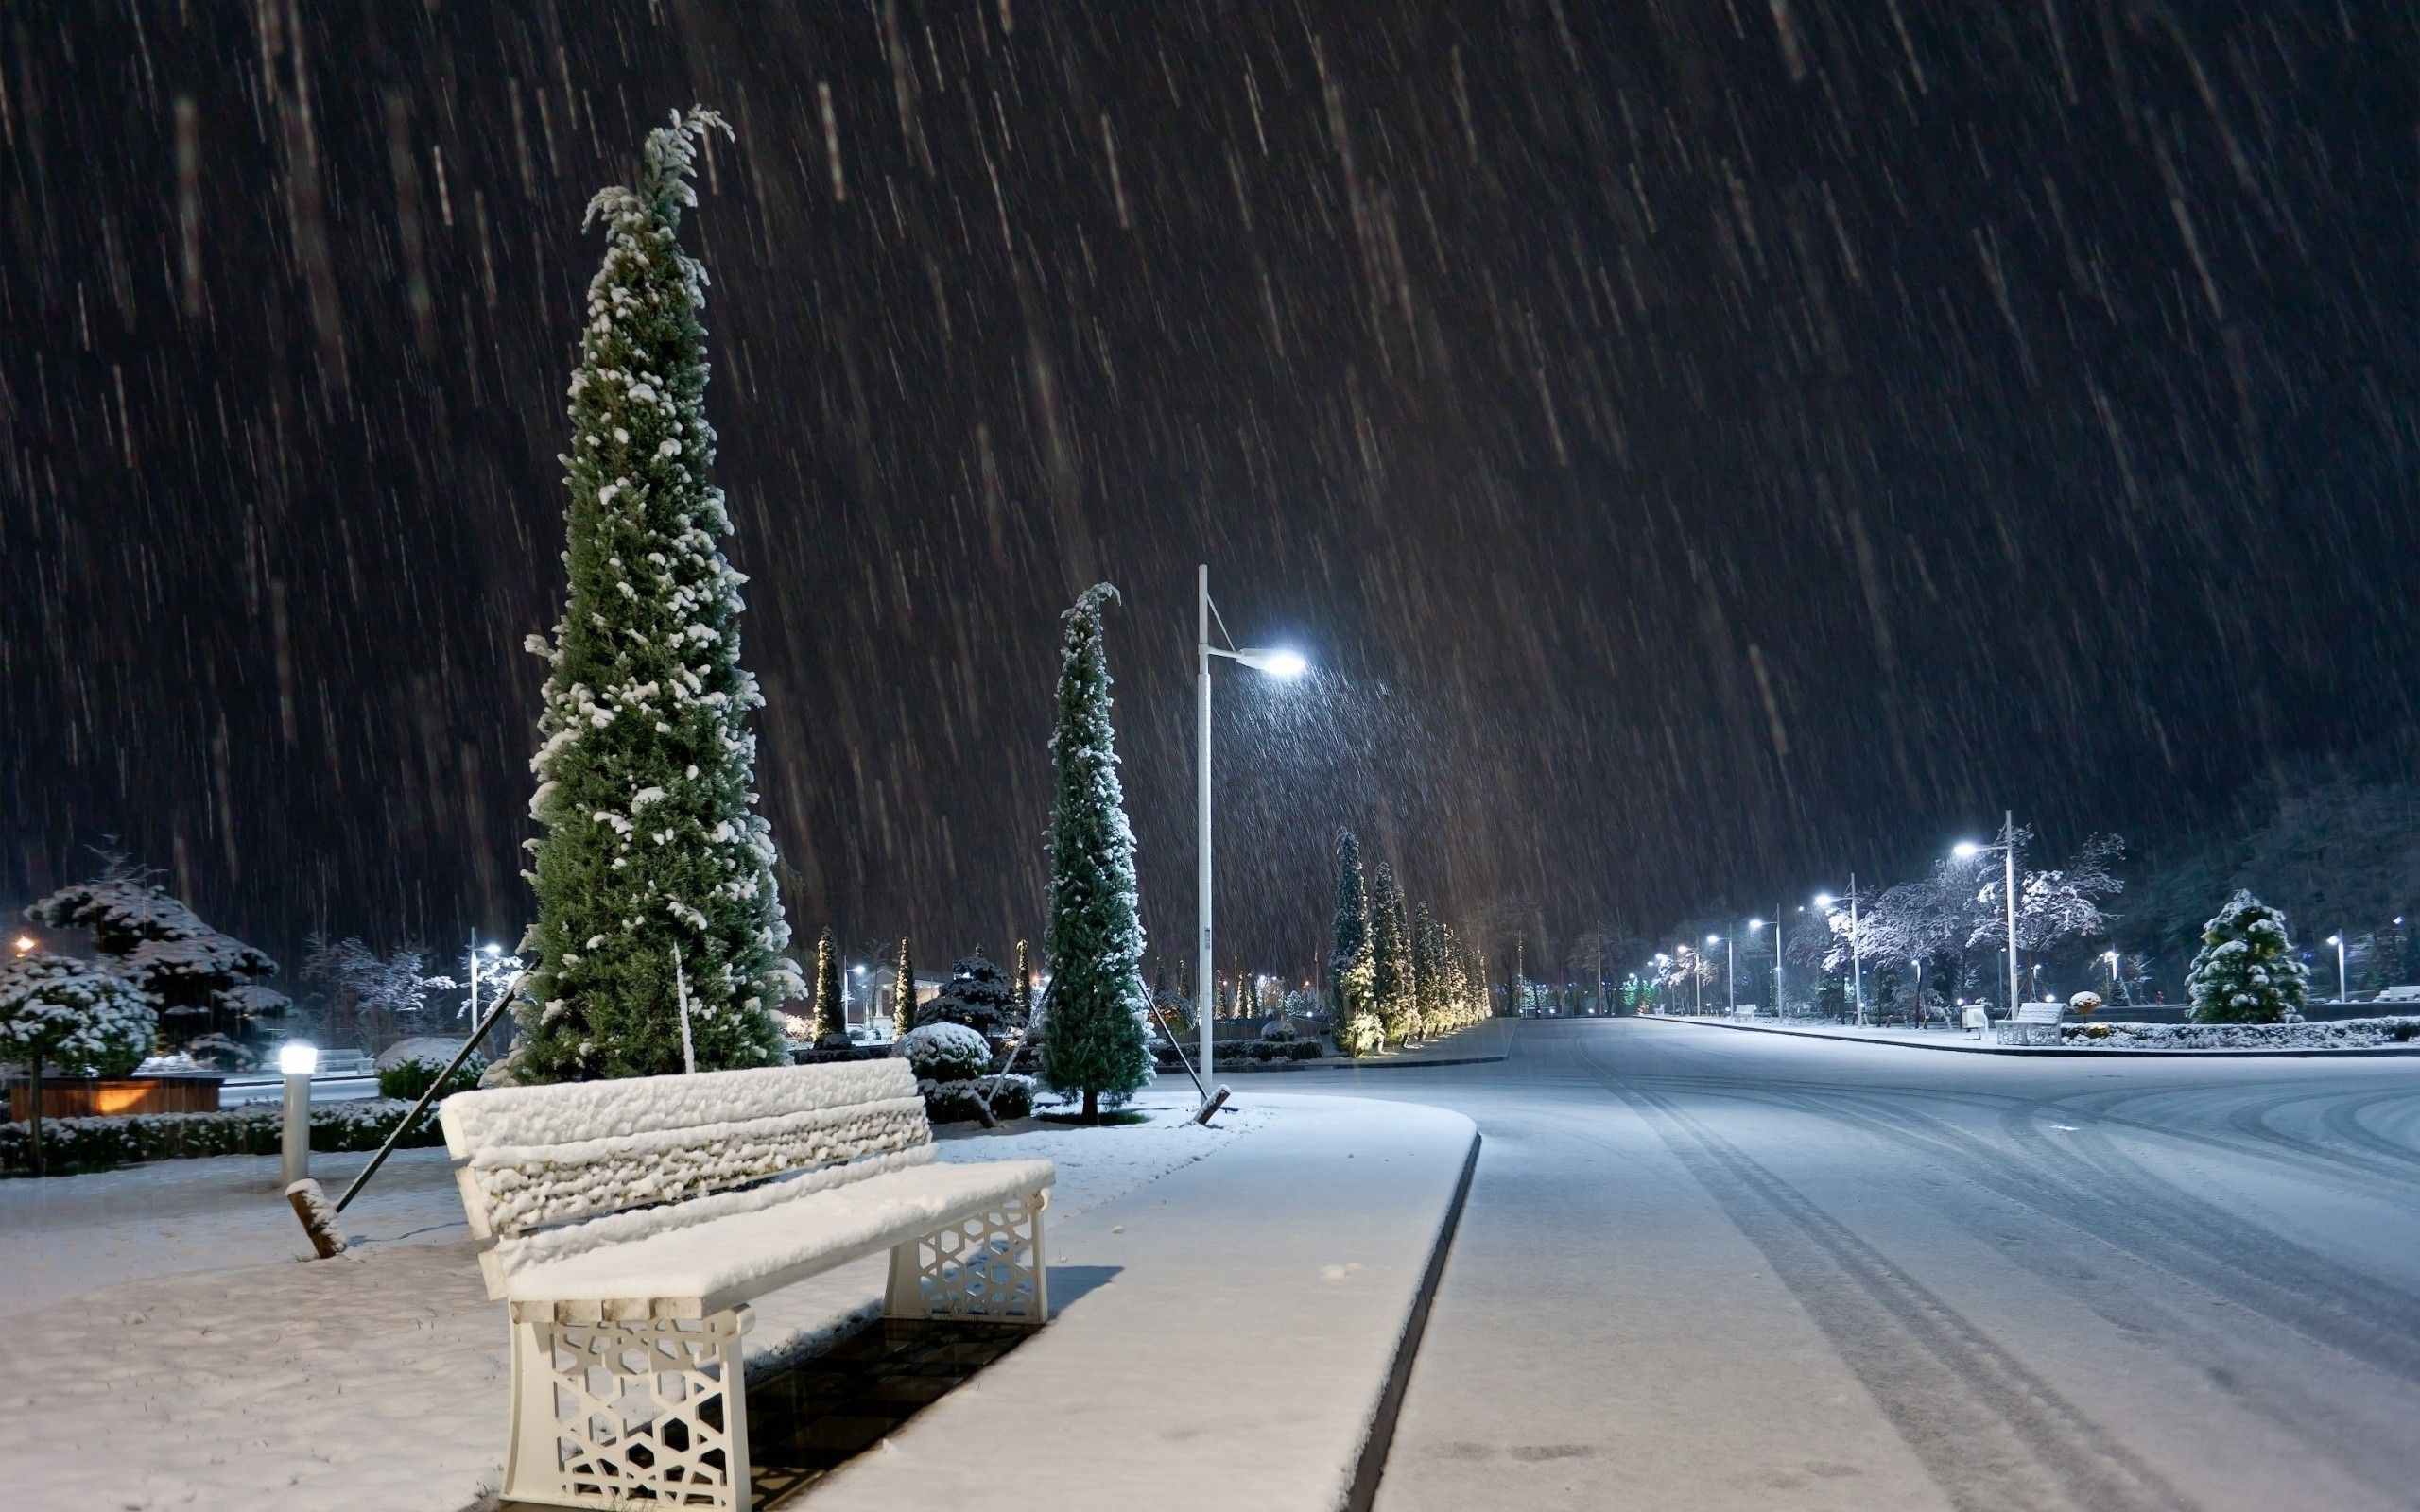 Snow night on a city street wallpaper and image, picture, photo